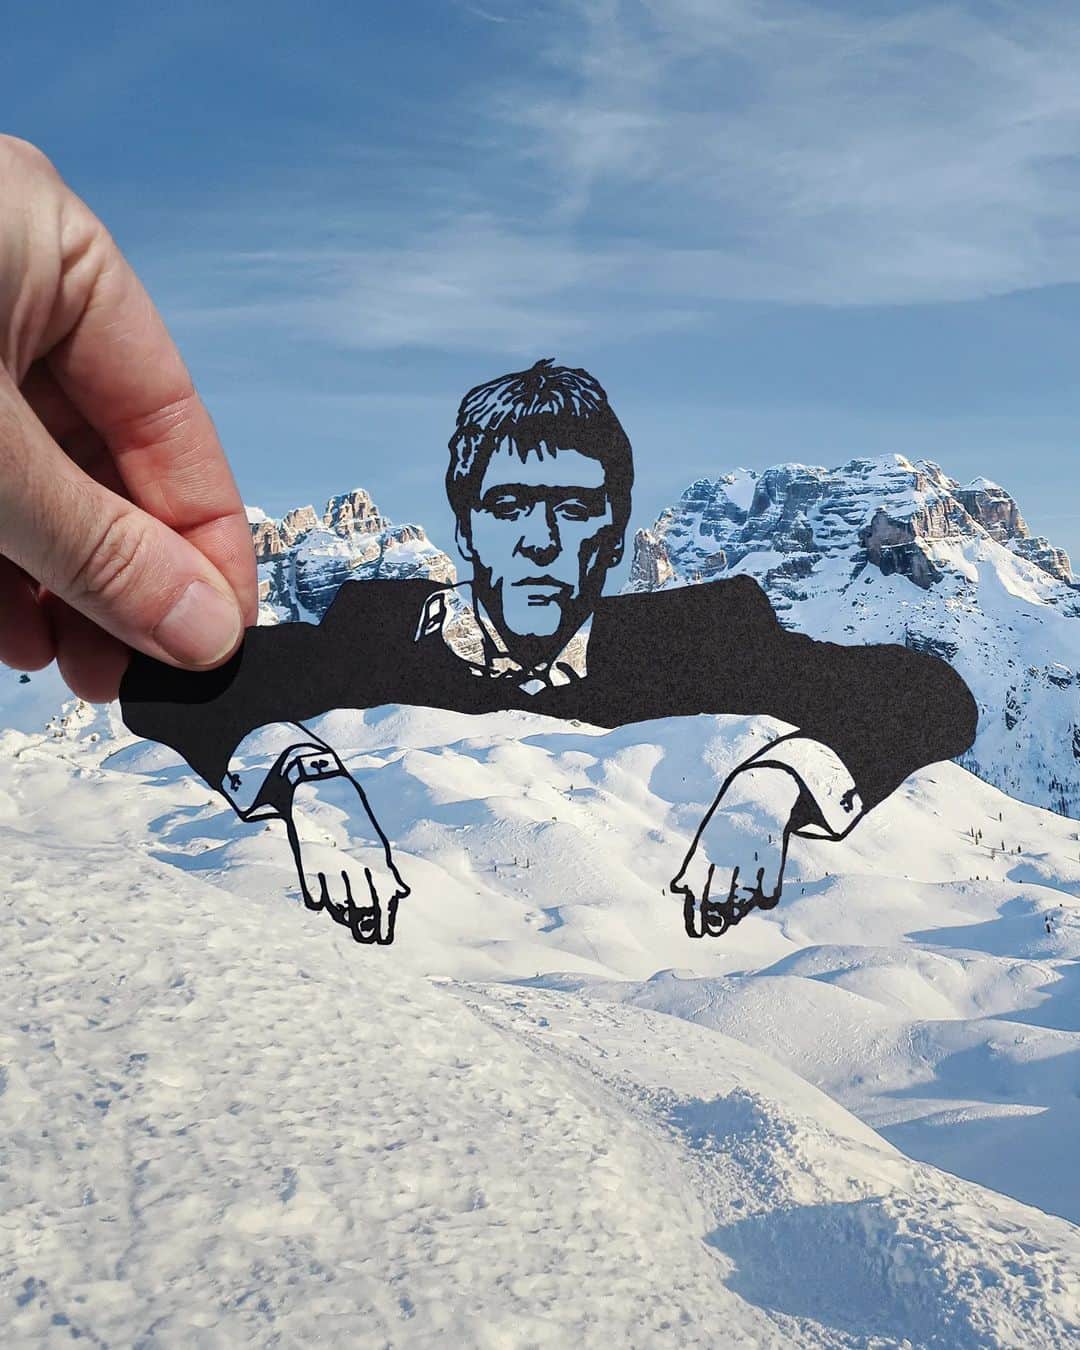 Rich McCorのインスタグラム：「It's been 40 years since Tony Montana entered pop-culture in 1983's Scarface and created one of the most iconic movie scenes of all time.   Here's my take on the scene - I'm calling it "Tony Mountainya".  #Scarface #AlPacino #TonyMontana」